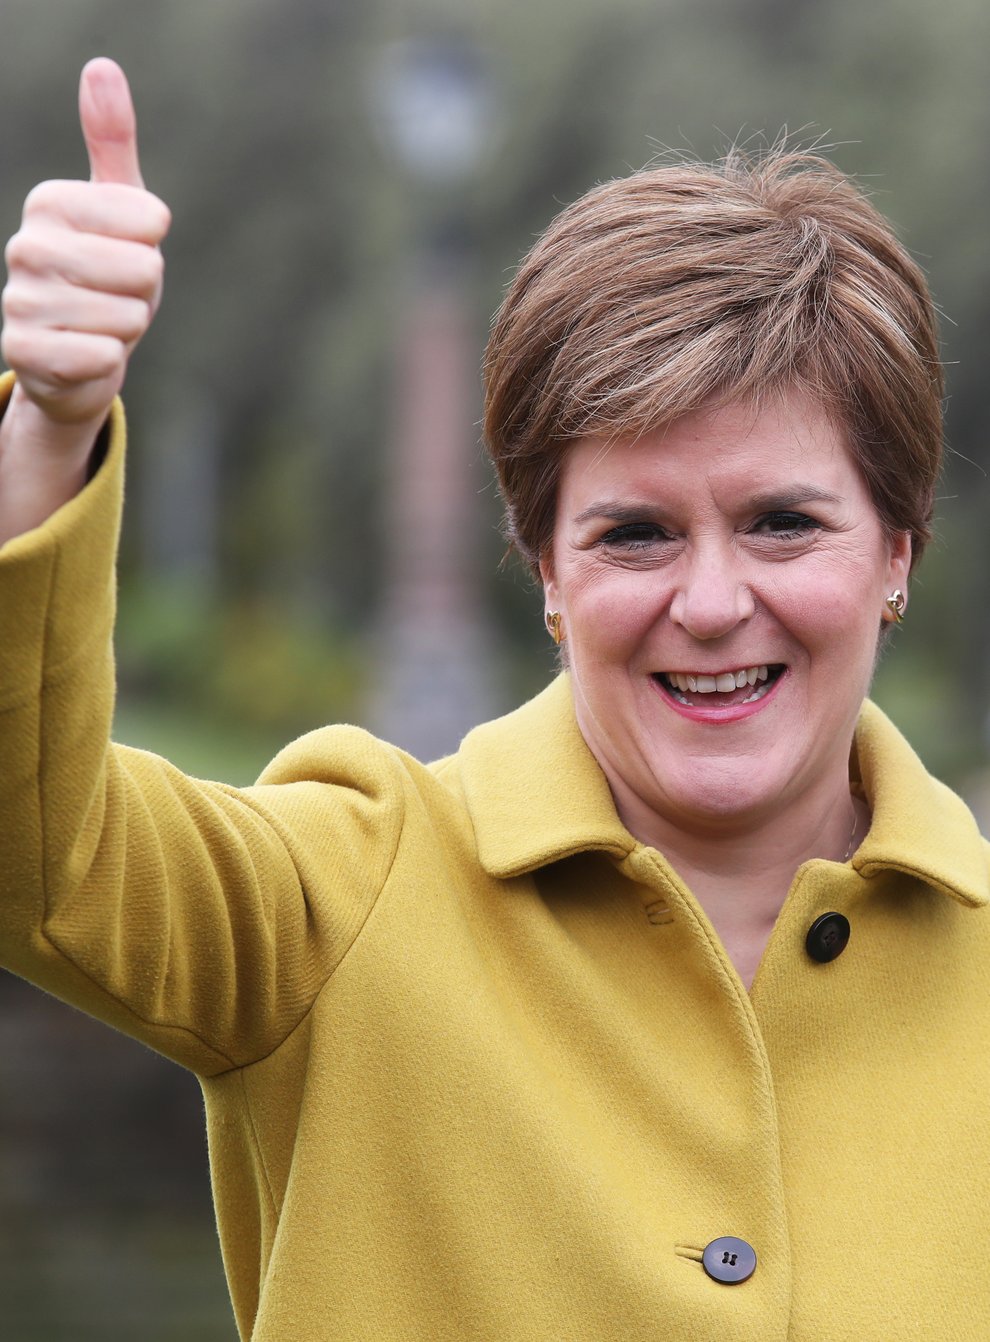 Scottish First Minister and SNP leader Nicola Sturgeon has spoken to Prime Minister Boris Johnson after her election win